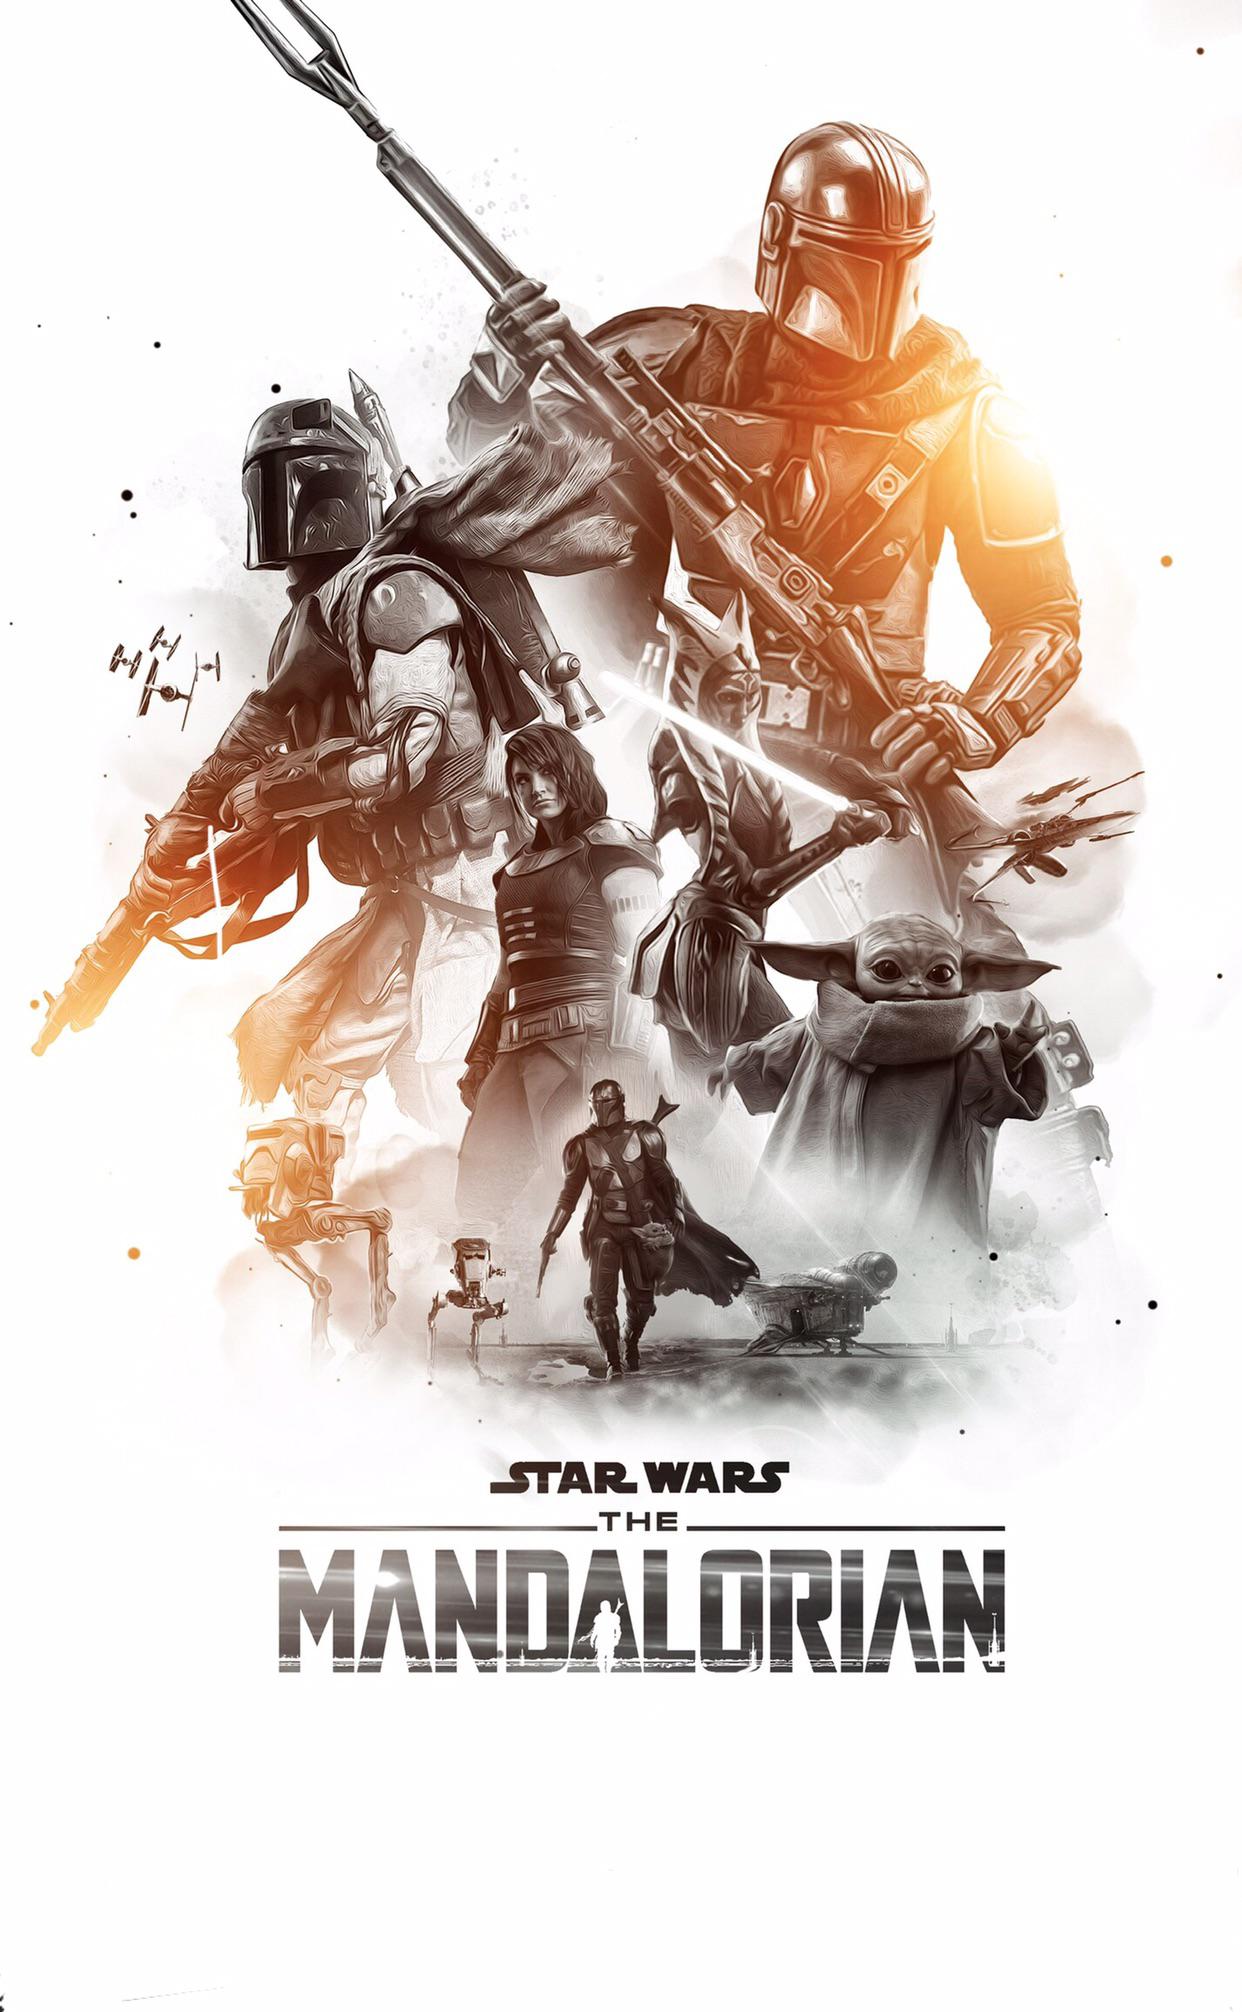 I turned the Mandalorian season 2 poster into a phone wallpaper feel free to take it and use it as you want!